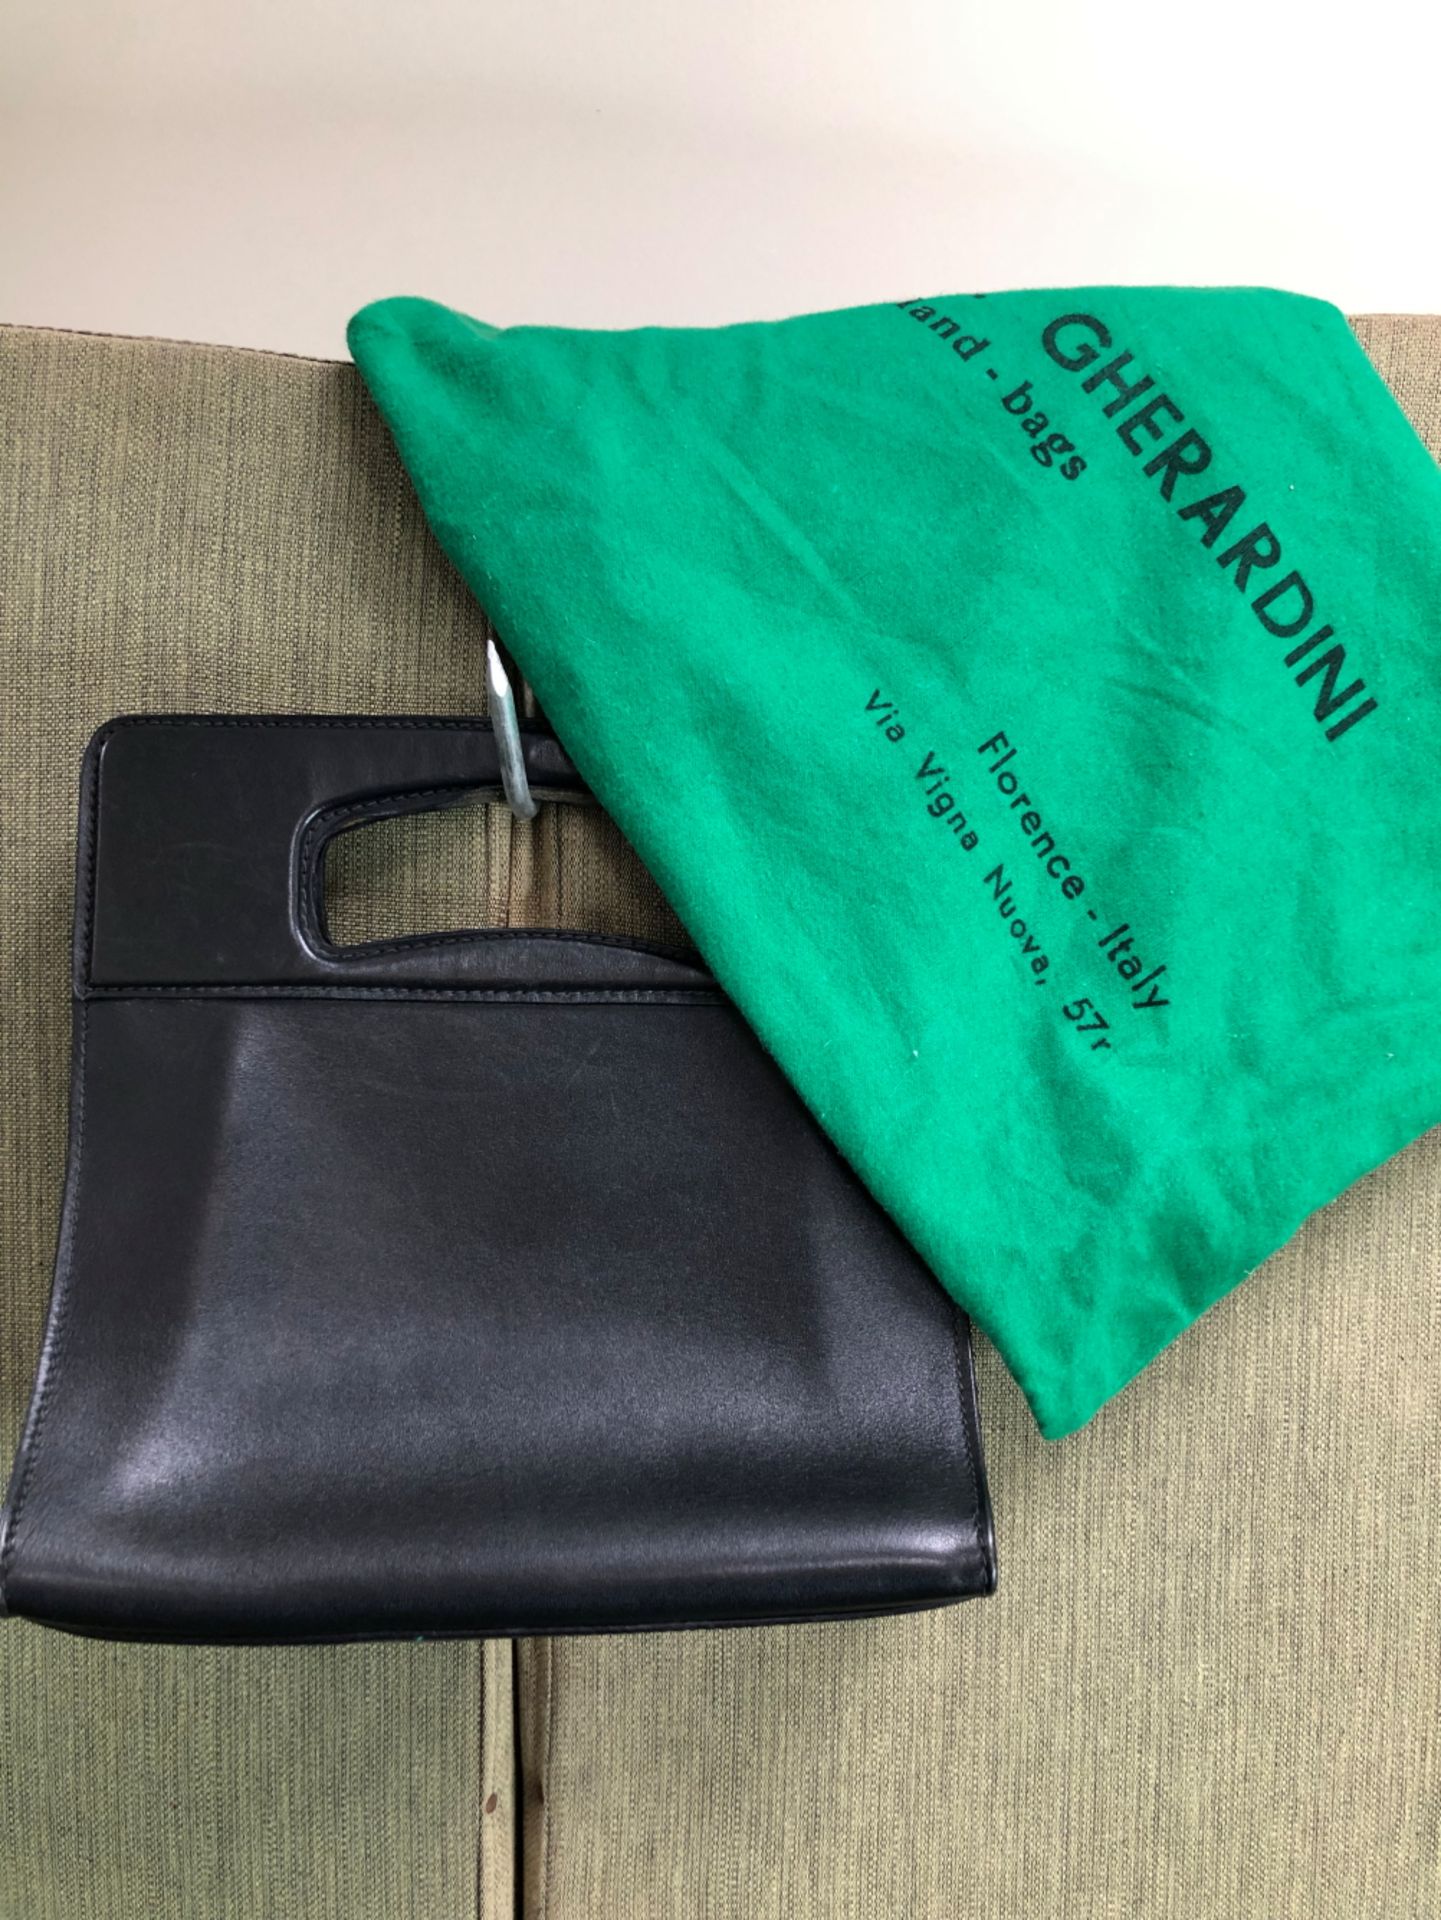 BAG. A GHERARDINI 1960's BLACK LEATHER SMALL BAG COMPLETE WITH DUST COVER.